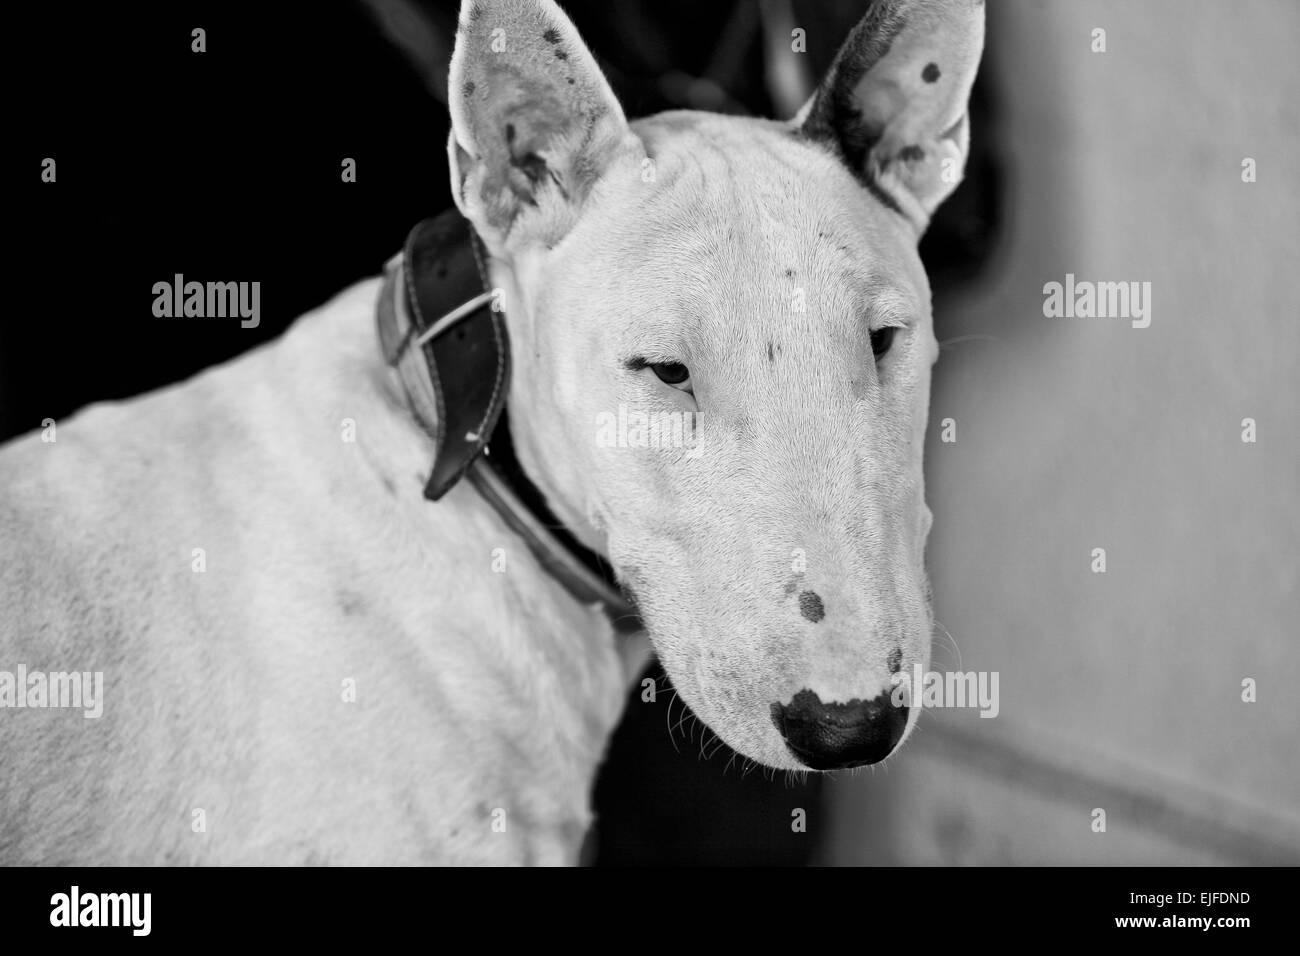 Domestic dog Bull Terrier breed. Focus on the dog. Black and white Stock Photo